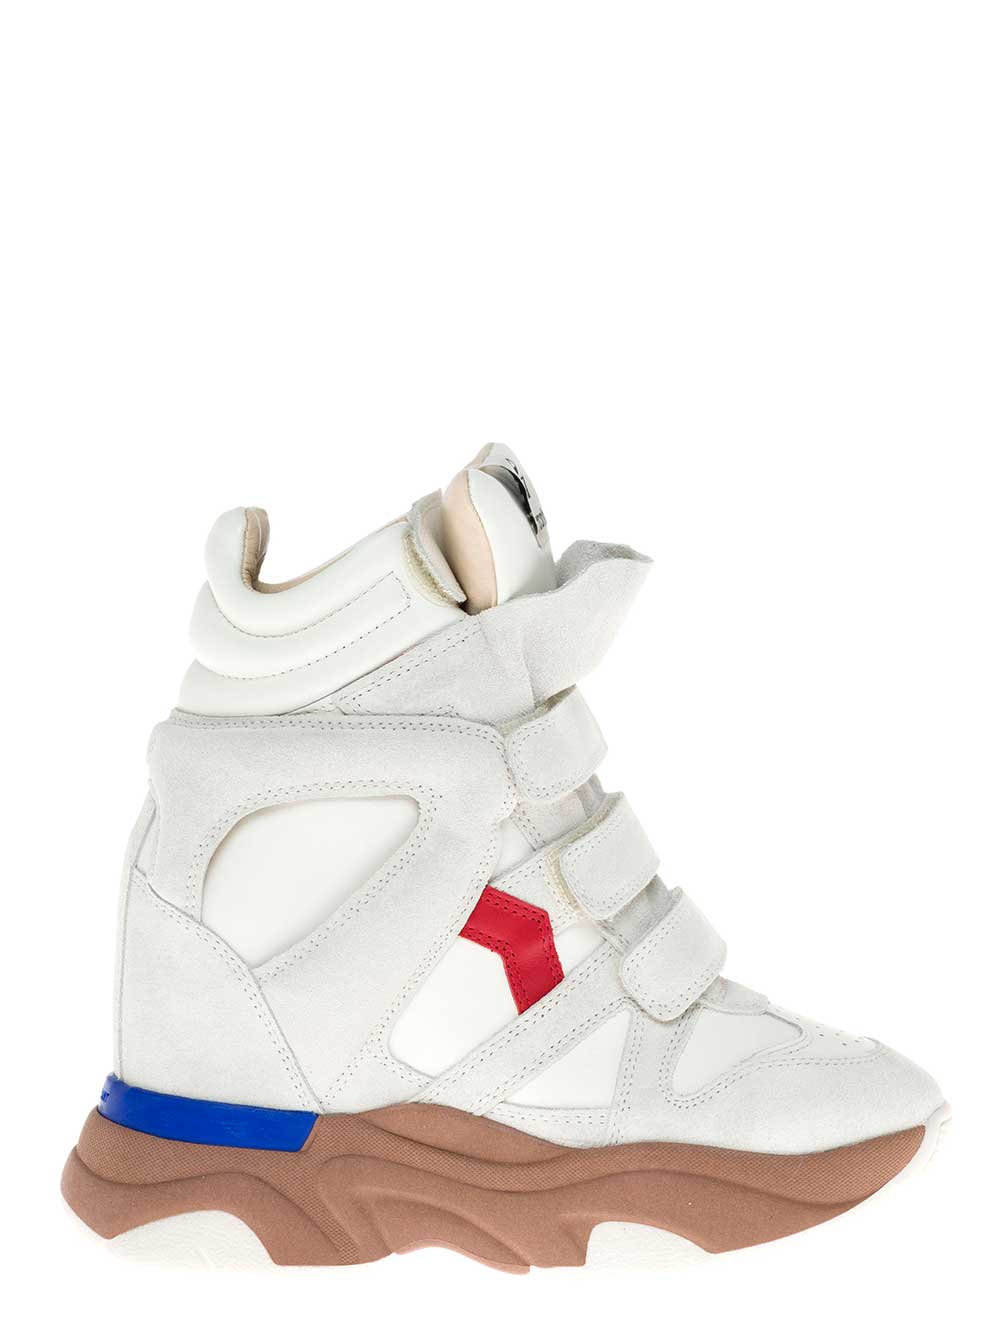 Isabel Marant Balskee Leather With Wedge Sneakers